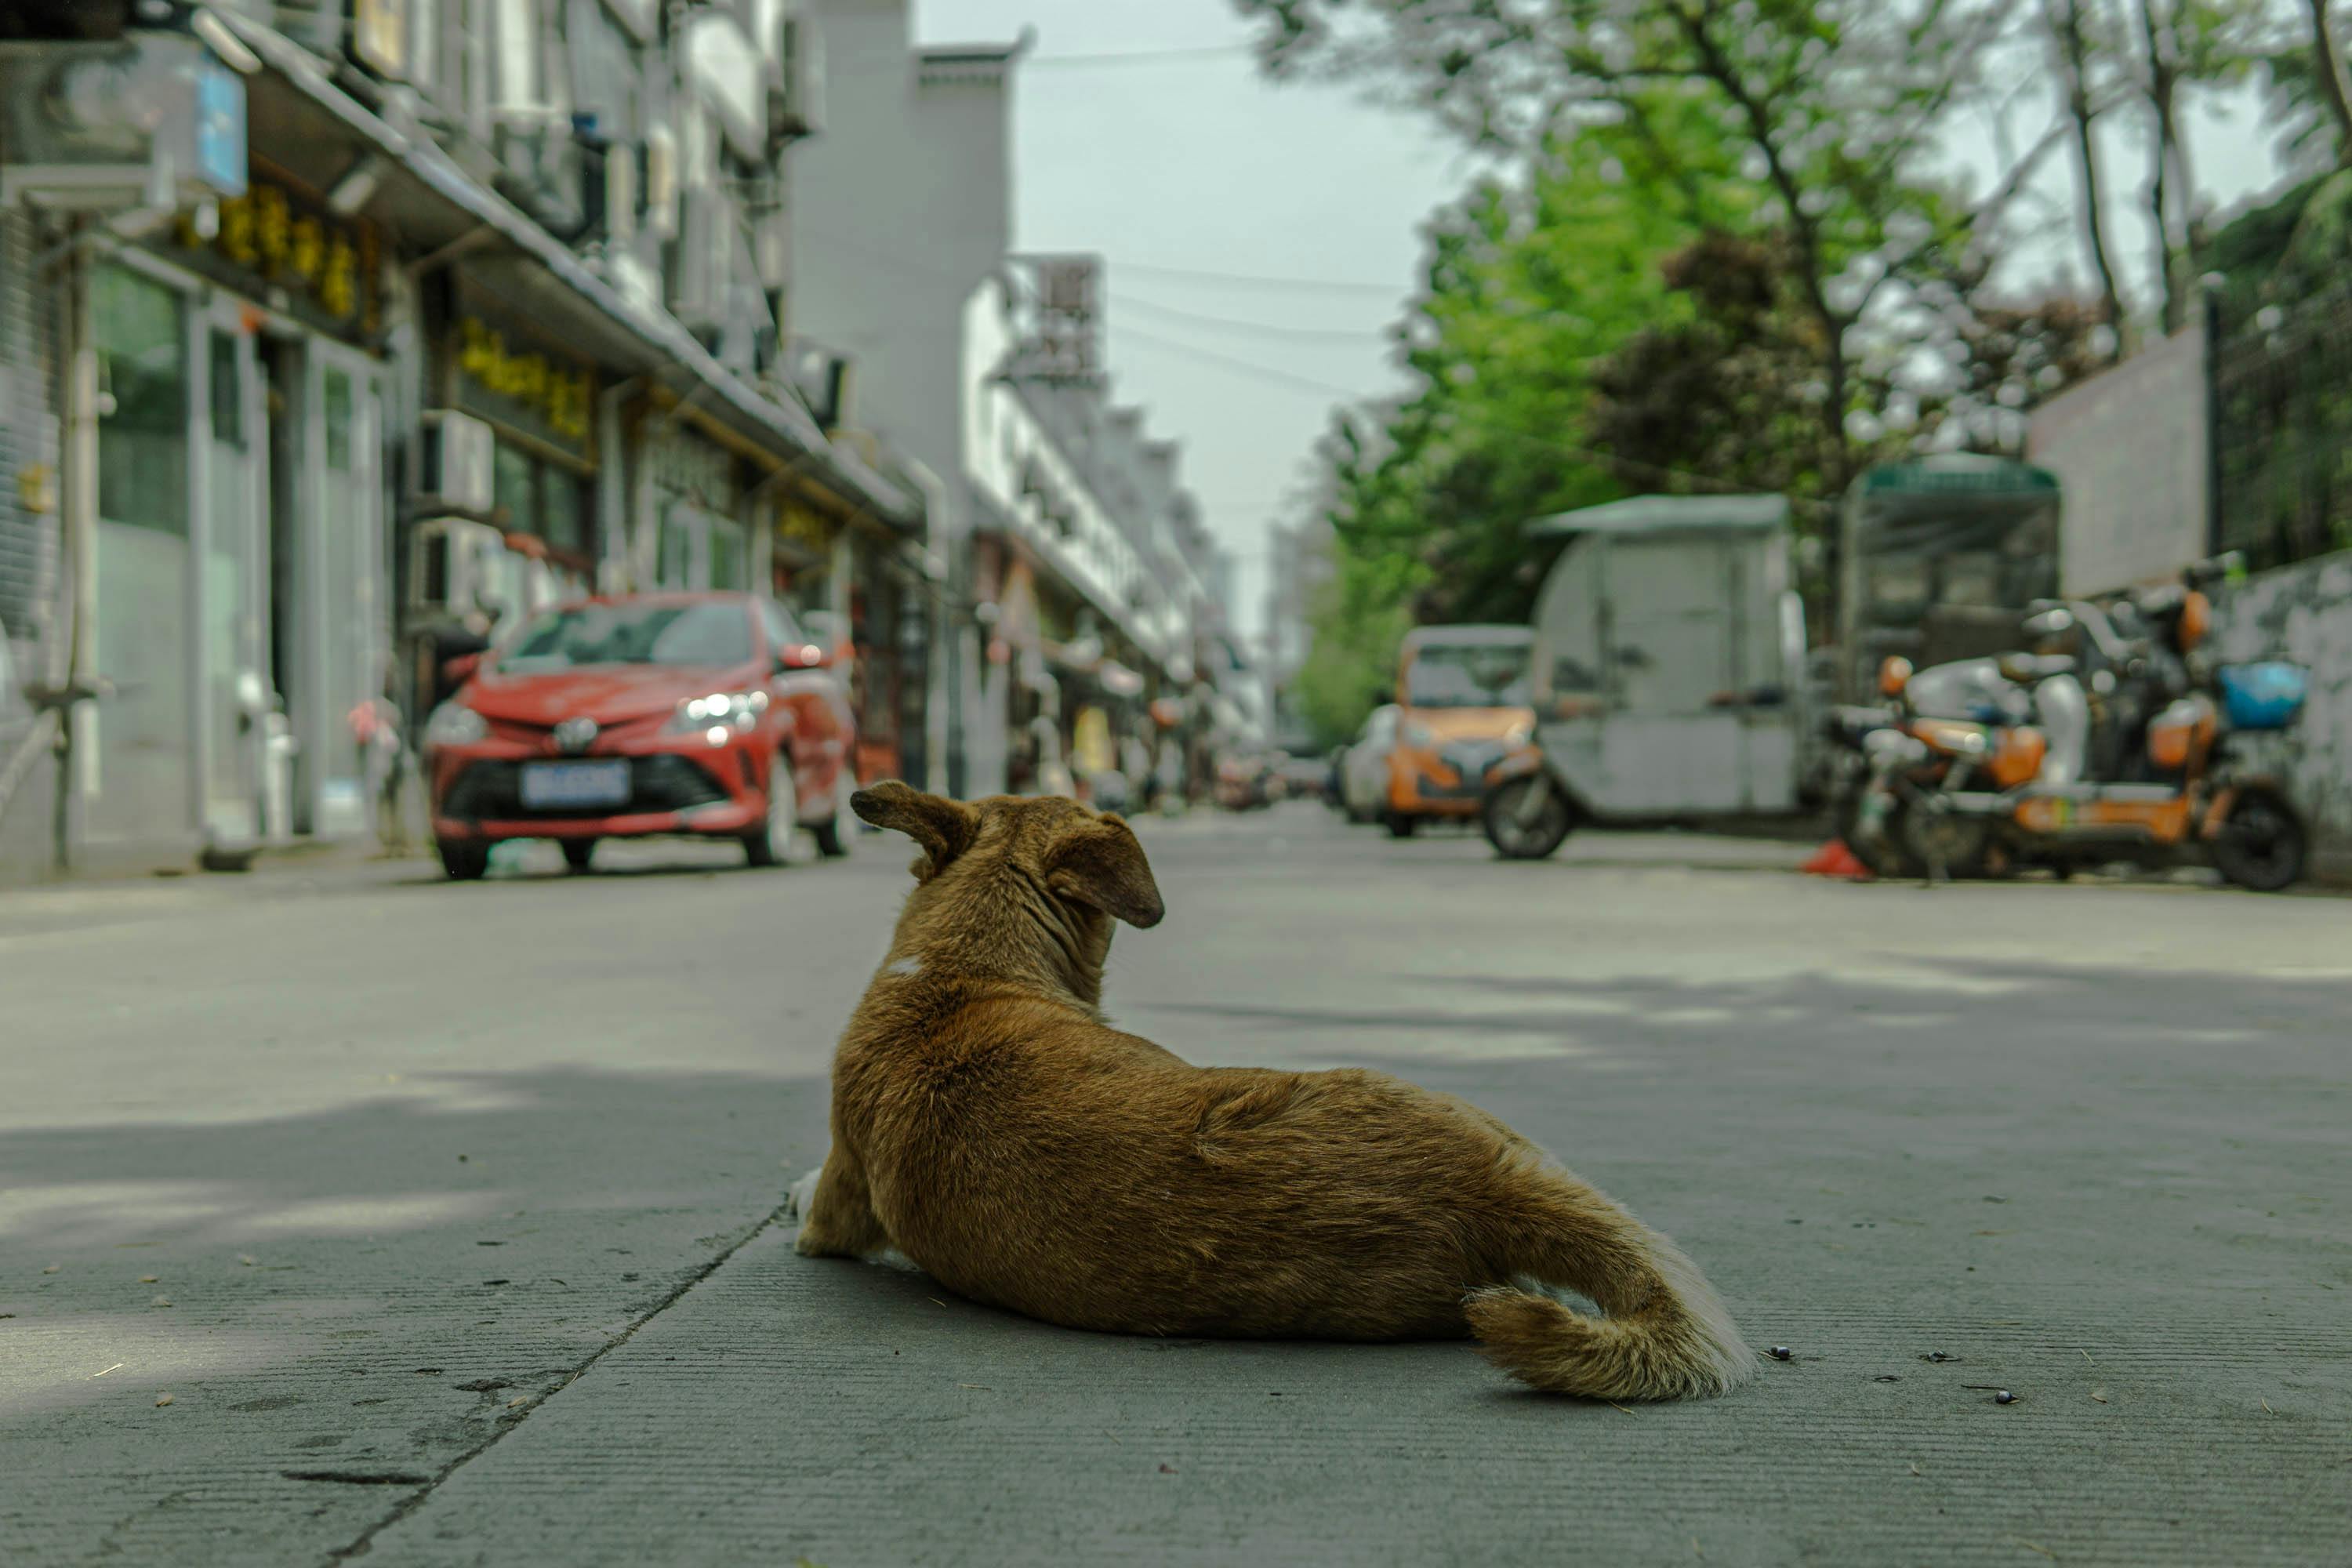 The same dog laying on the side of a road